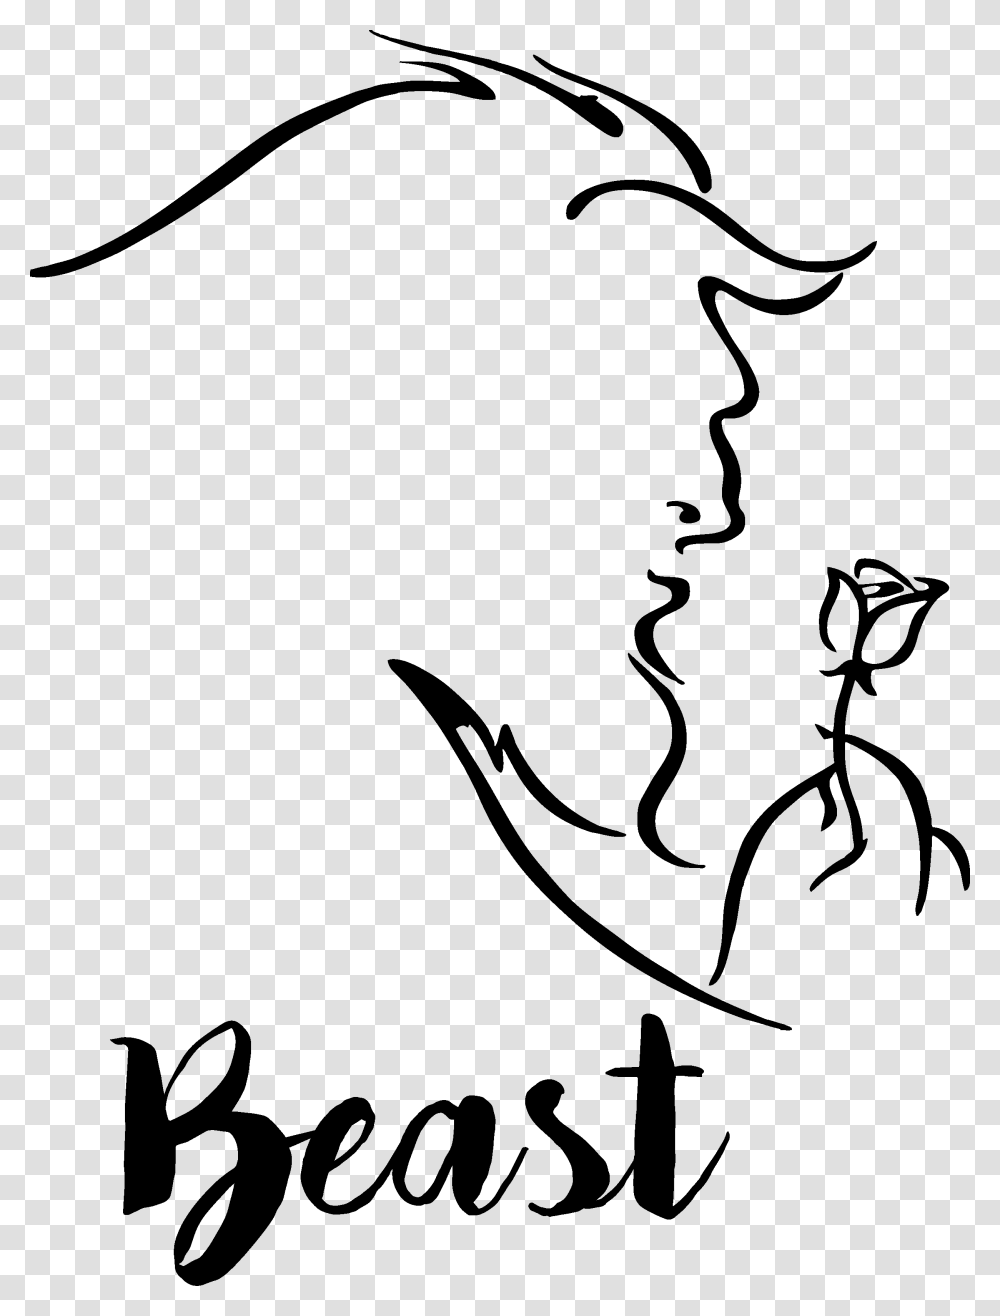 Latest Beauty And The Beast Clip Art This Week Holiday Beauty And The Beast Sketch, Face, Photography, Portrait Transparent Png